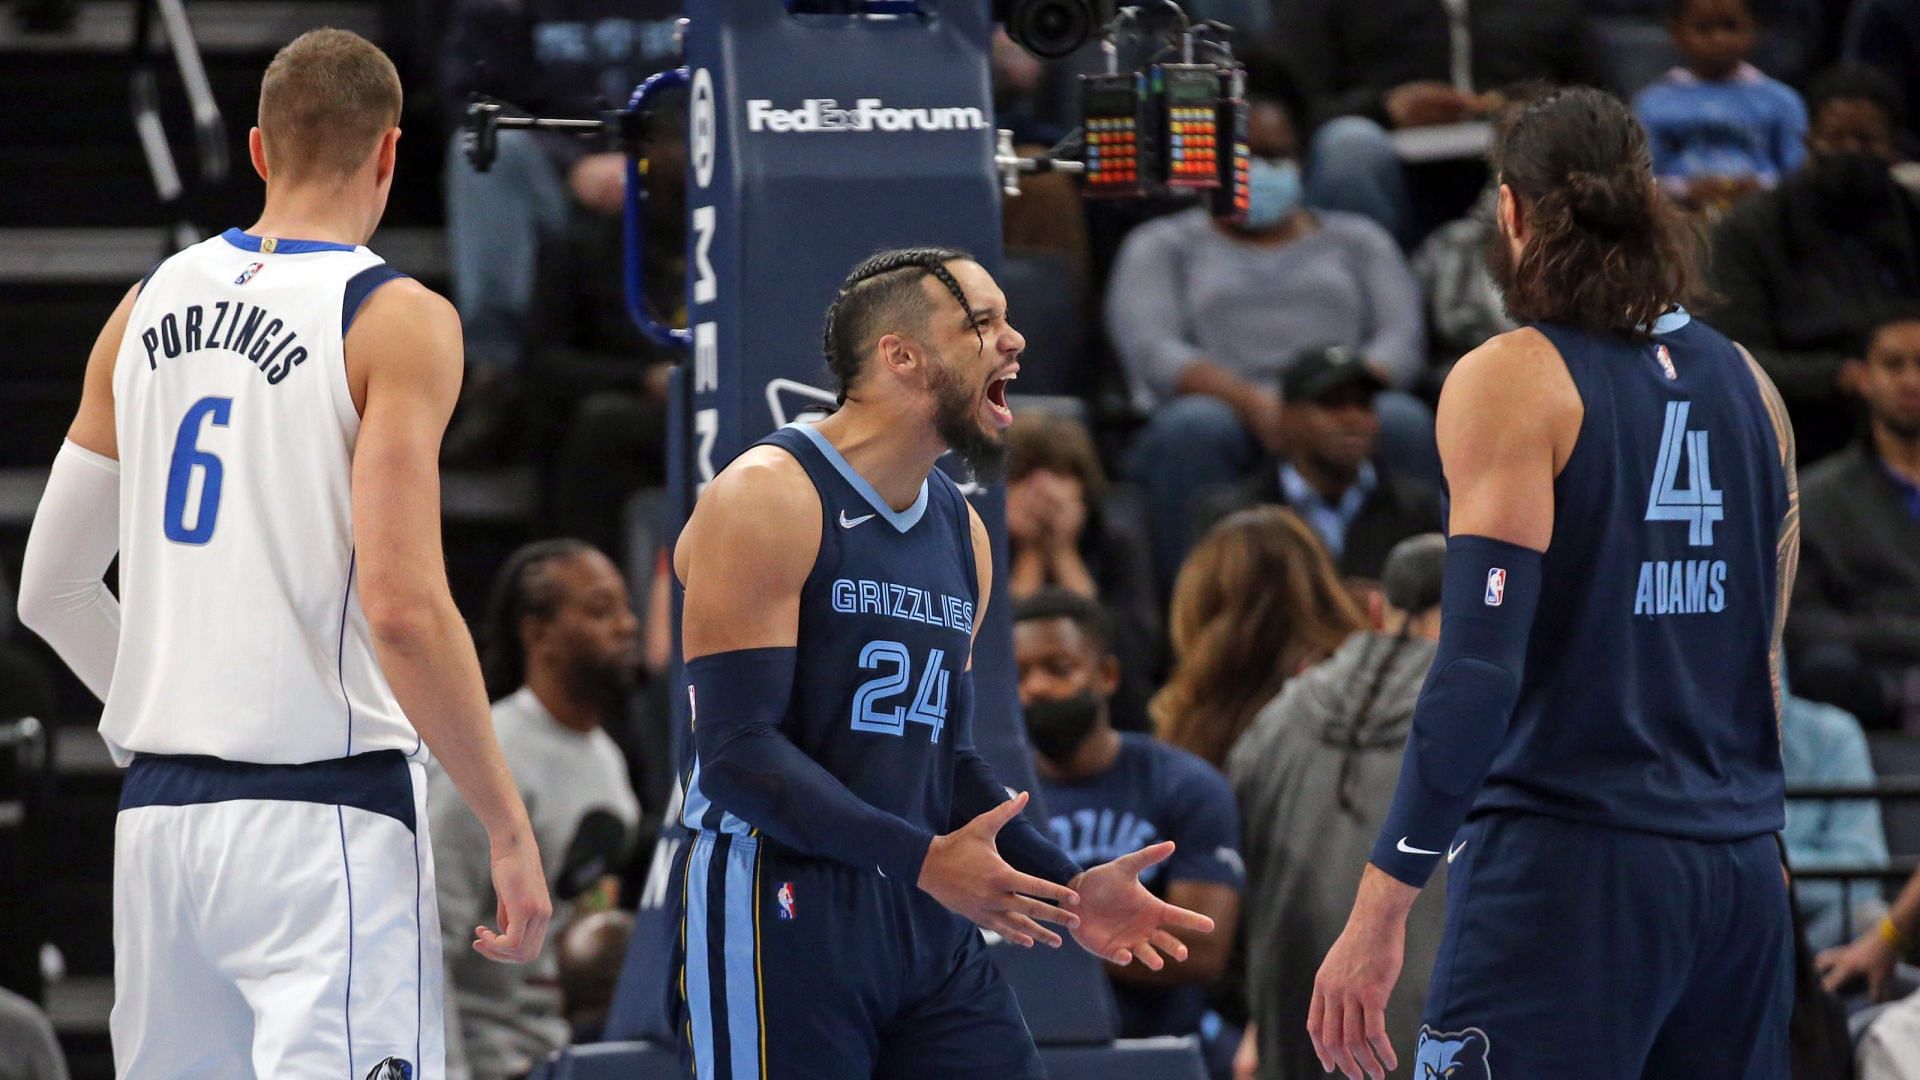 The Memphis Grizzlies lost their composure in their loss to the Dallas Mavericks. [Photo: Bleacher Report]